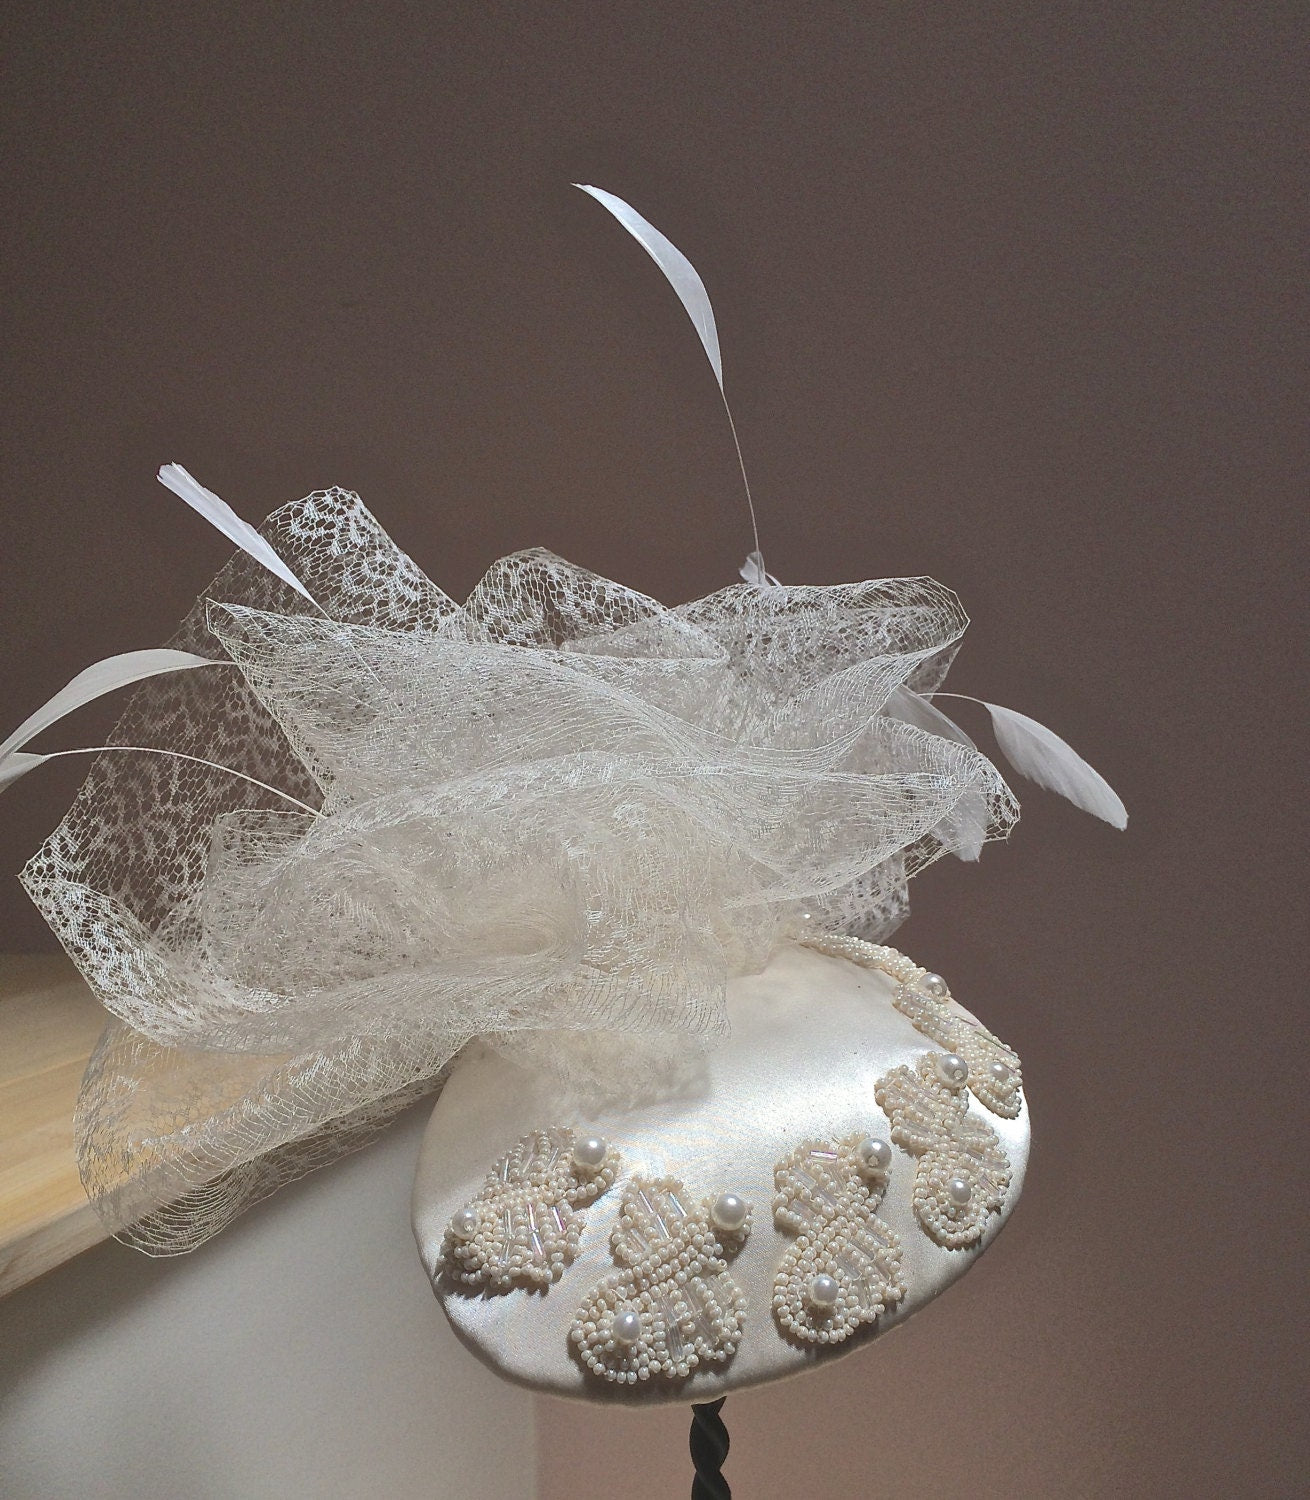 Ivory Satin Fascinator with Beaded Pearls, Wedding Headpiece, Bridal headdress in Ivory. Vintage veiling on Ivory Satin, beads and Feathers